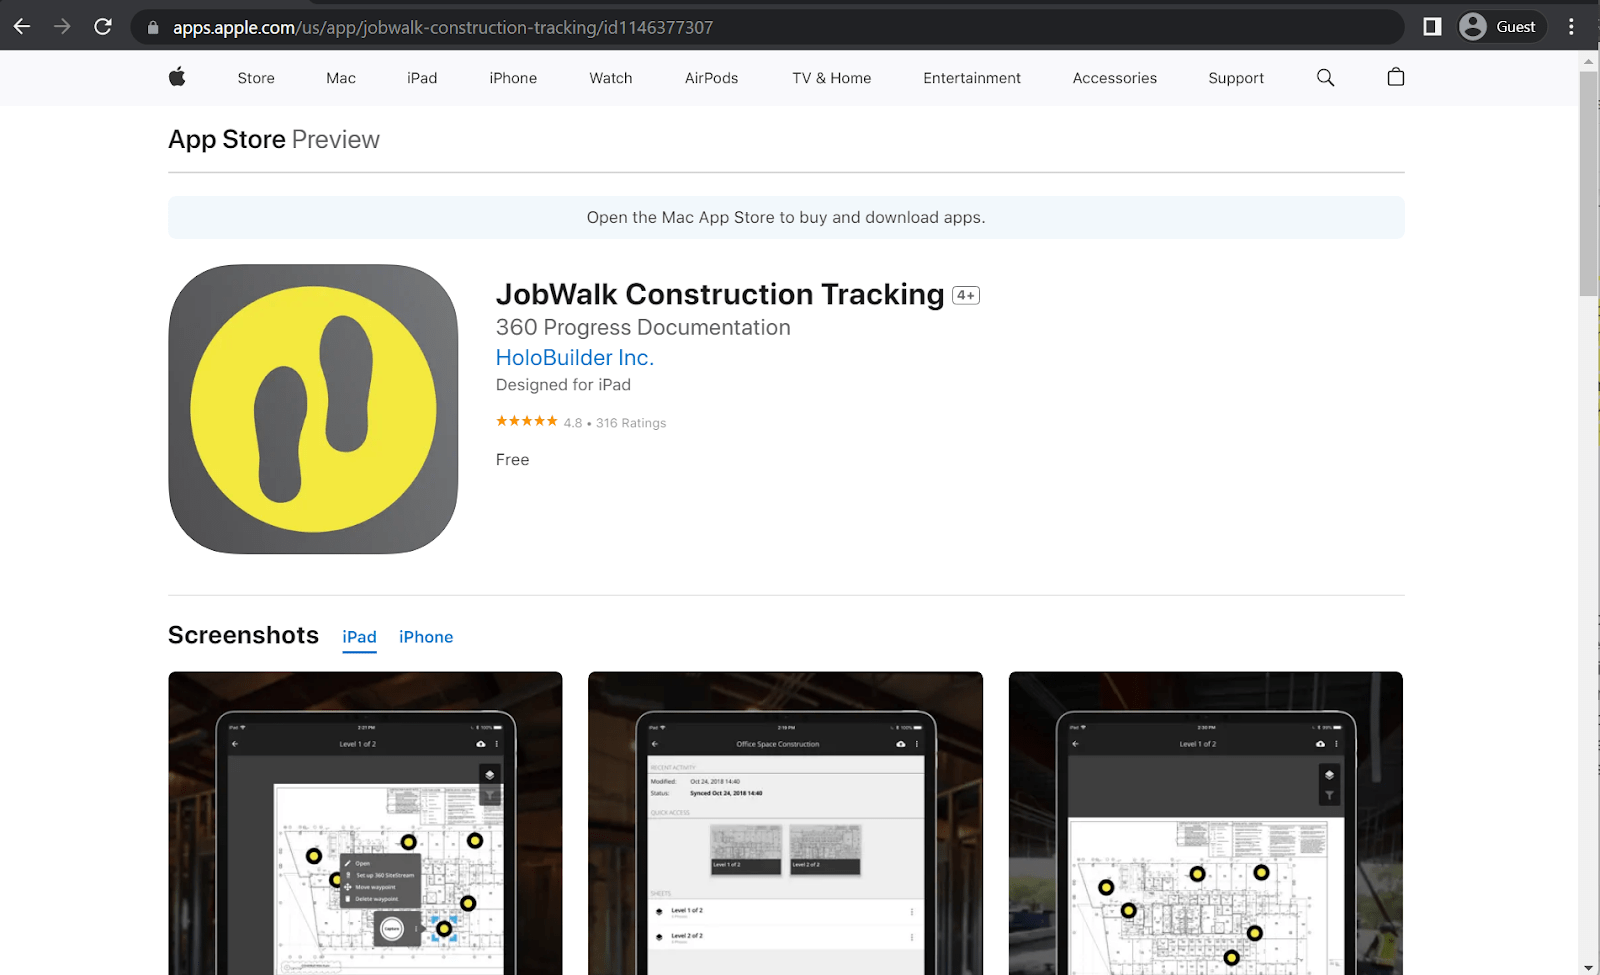 jobwalk construction tracking app store page